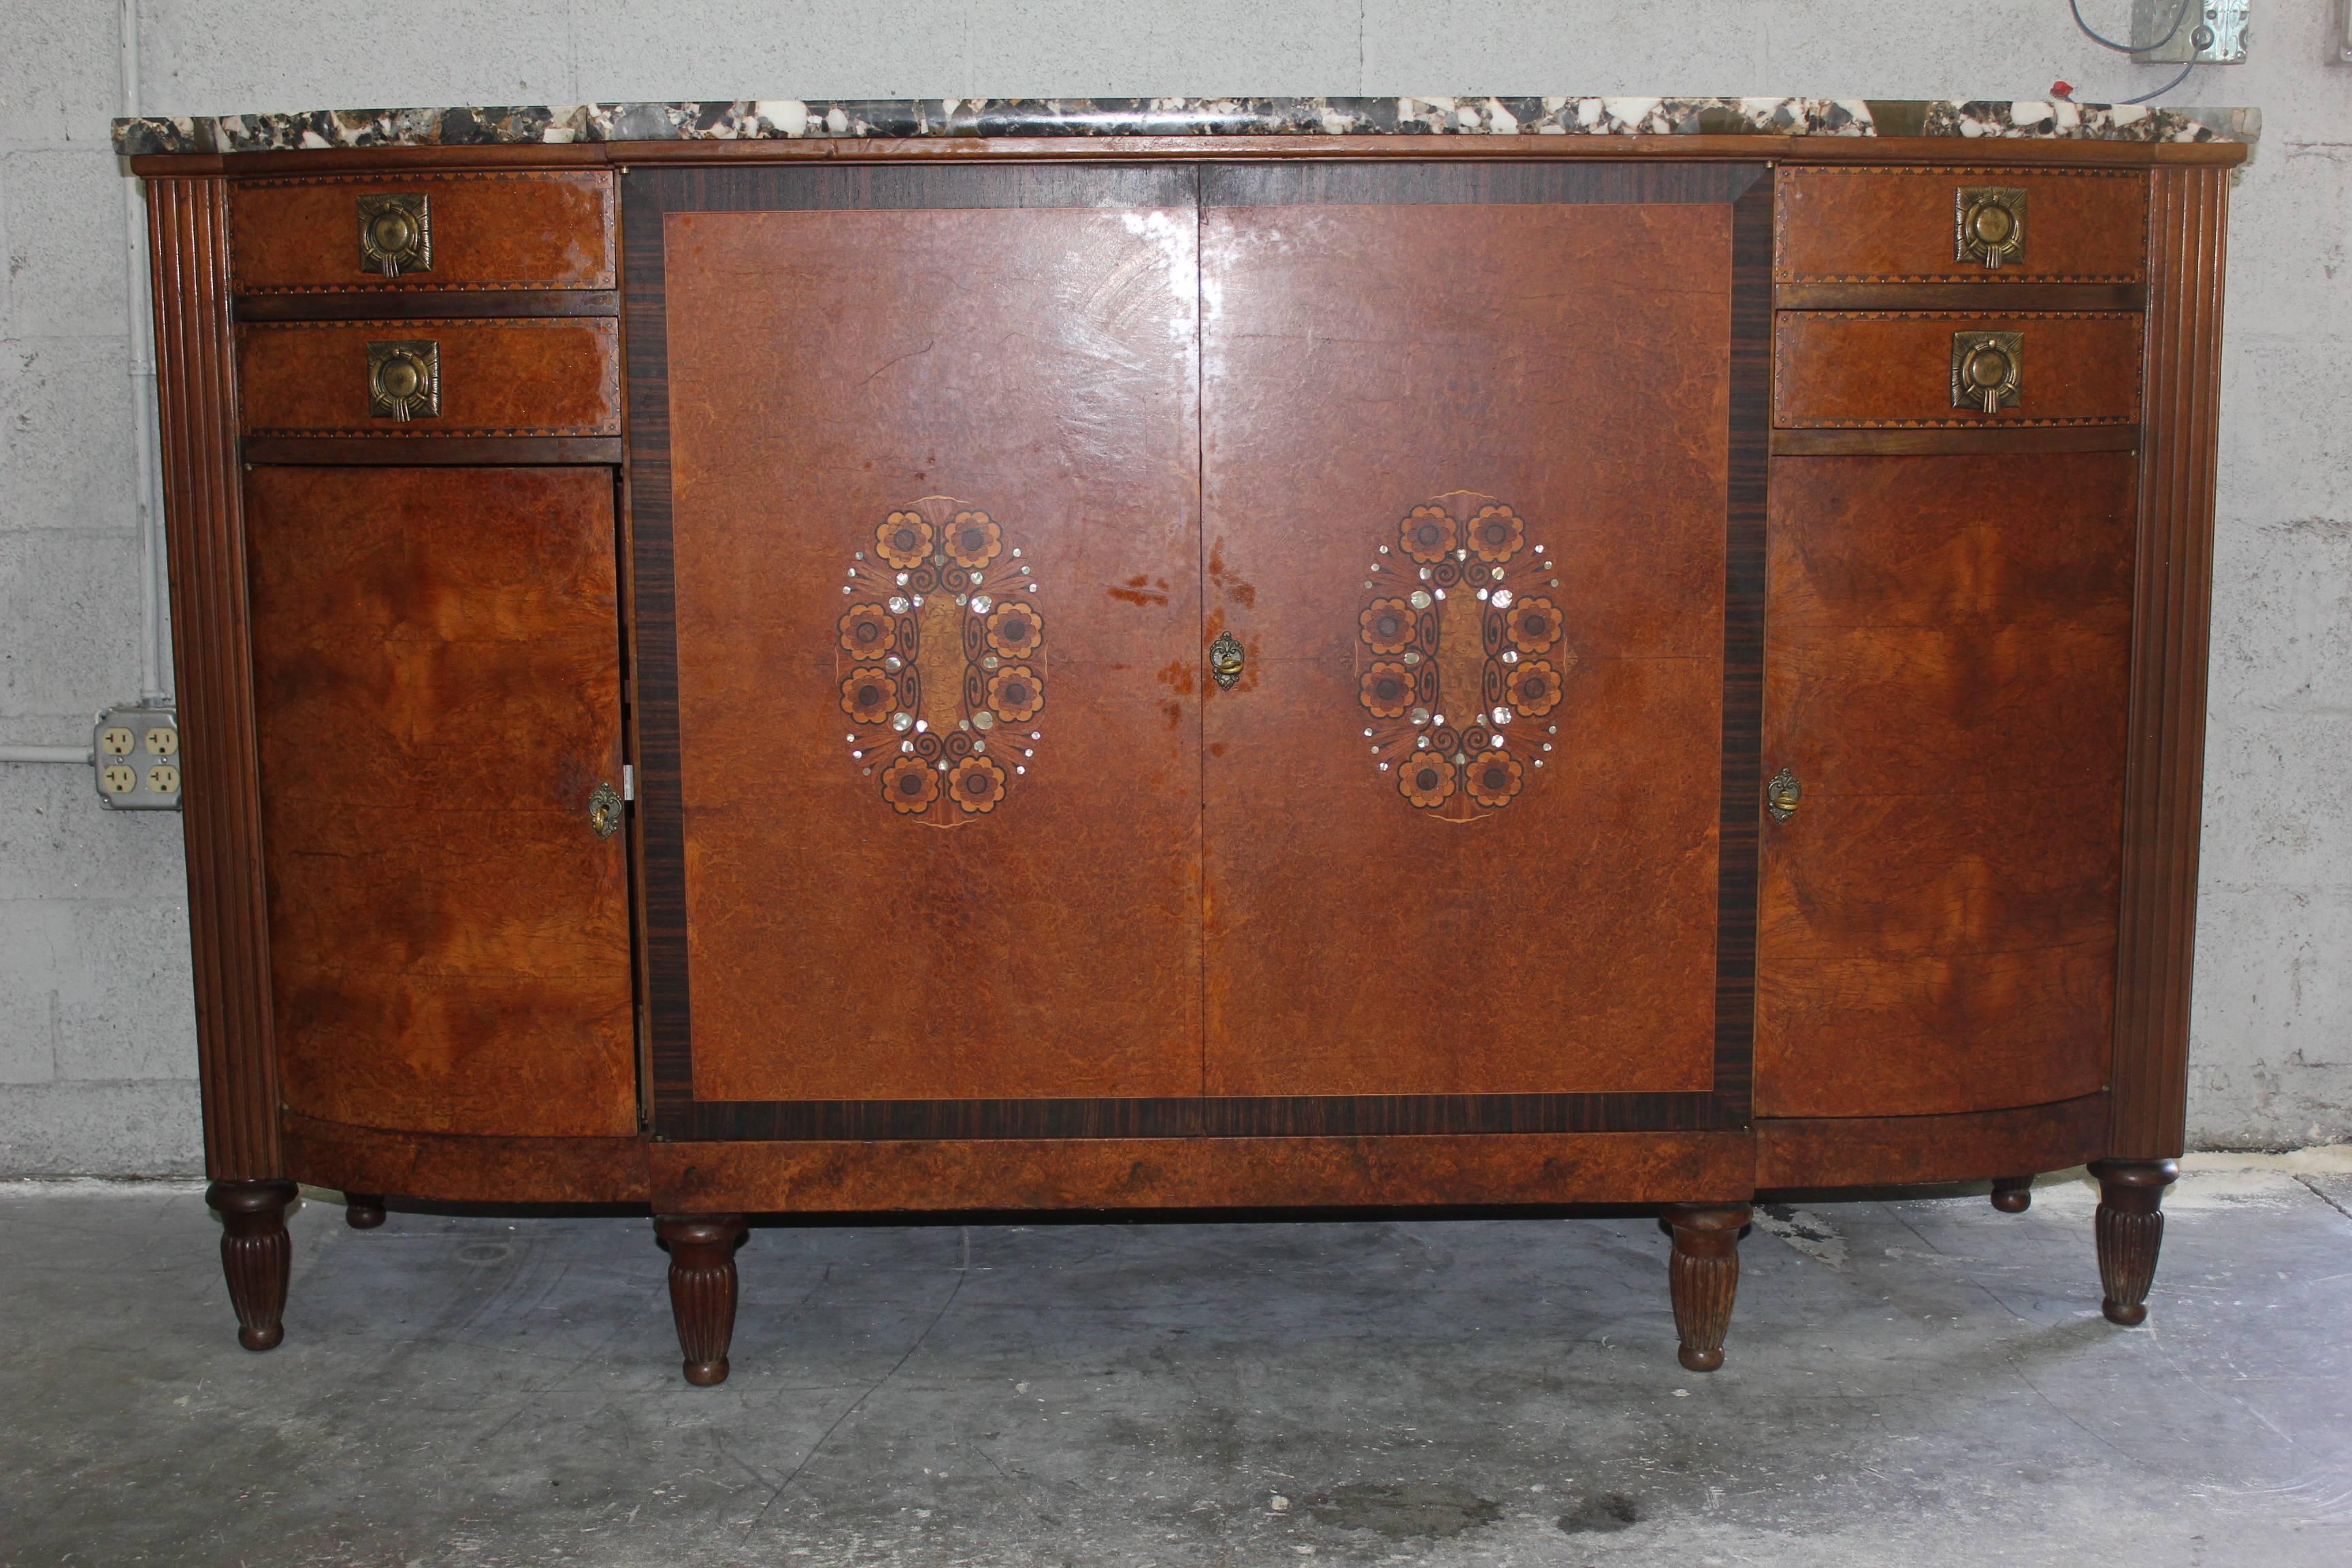 A French Art Deco Sideboard / Buffet burl Amboyna with Macassar ebony and mother-of-pearl detail buffet, circa 1930s. Marble top. Very fine detail.